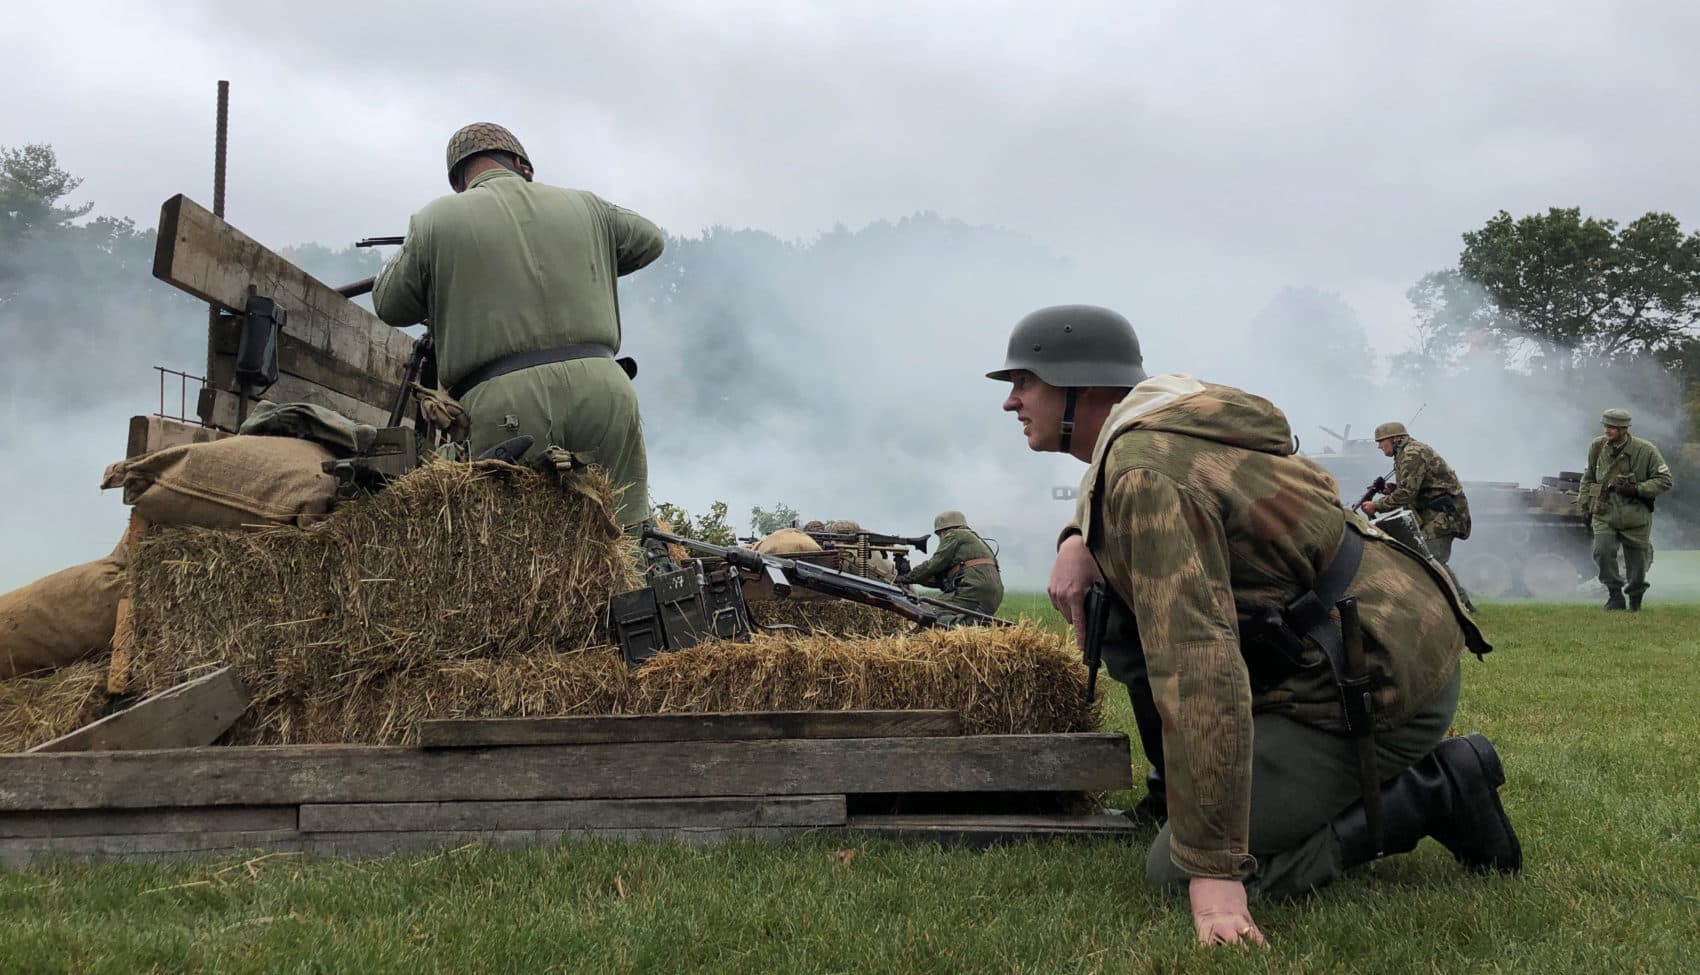 Actors fired vintage weapons during a World War II reenactment at the Collings Foundation's American Heritage Museum in Hudson on Oct. 12. (Callum Borchers/WBUR)